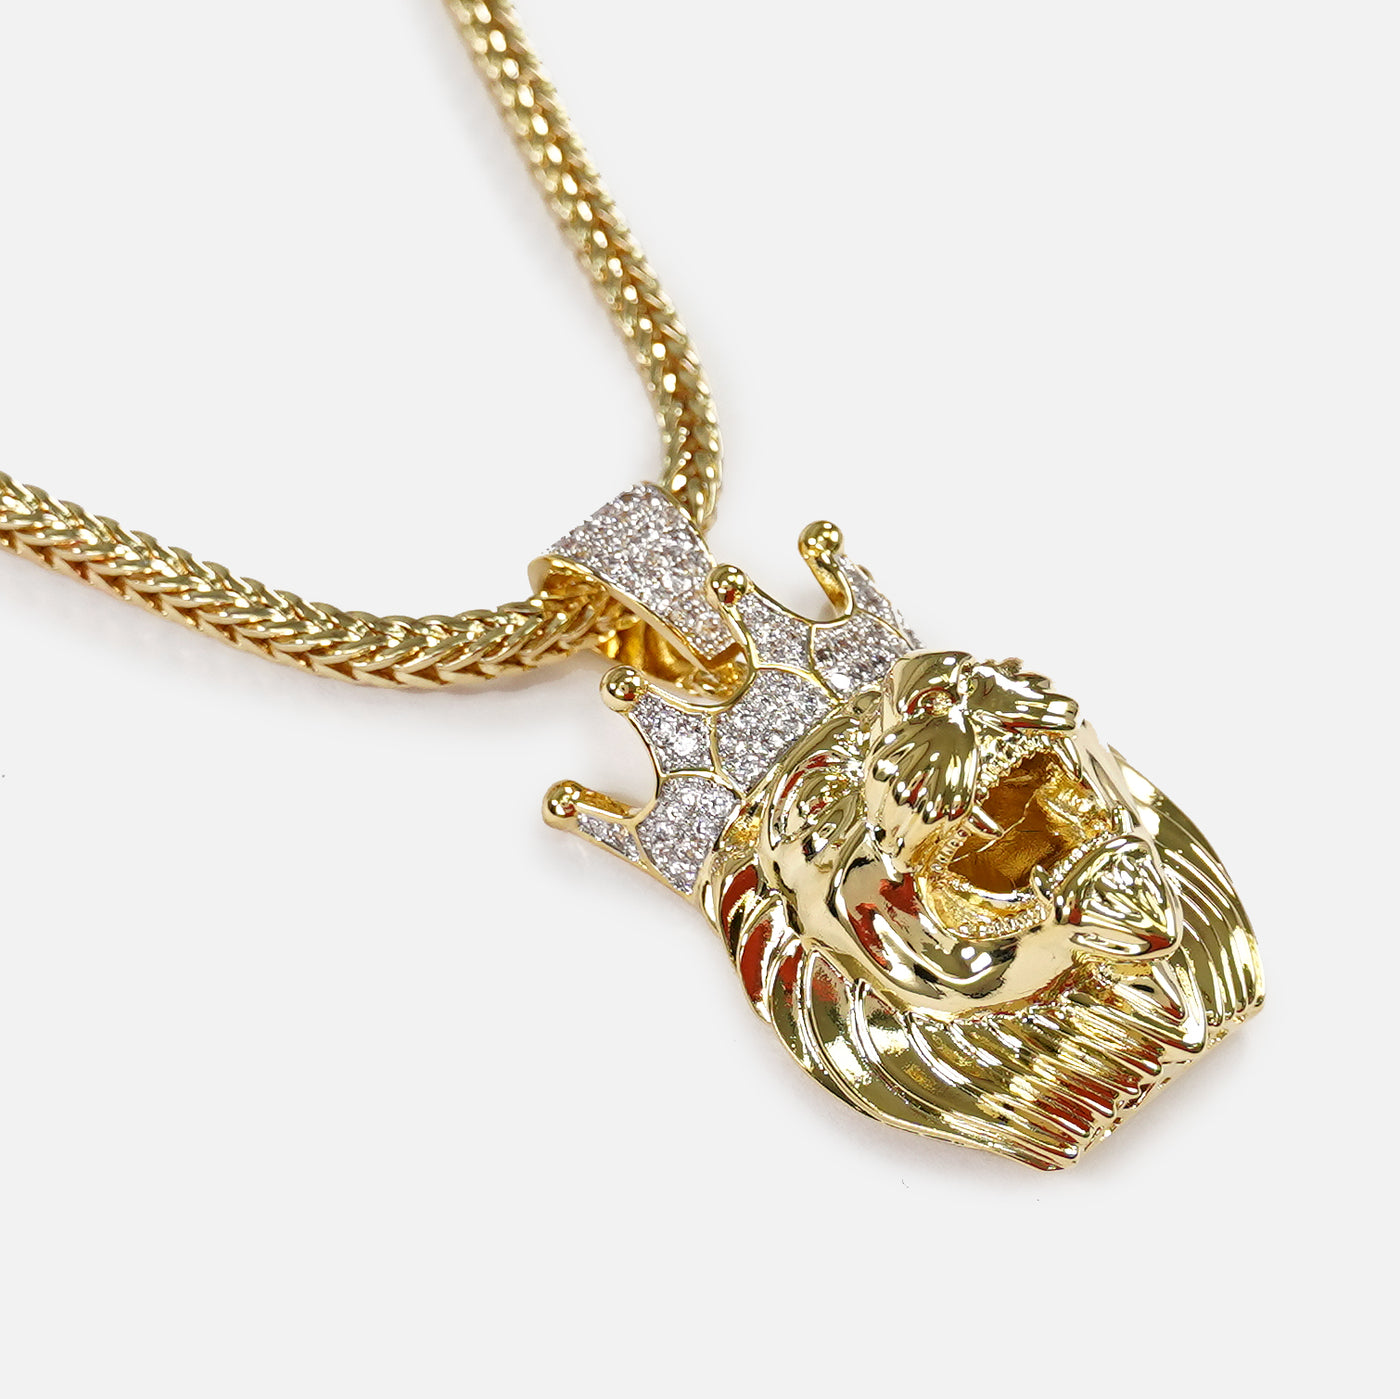 Lion King 1½" Pendant with Chain Necklace - Gold Plated Stainless Steel